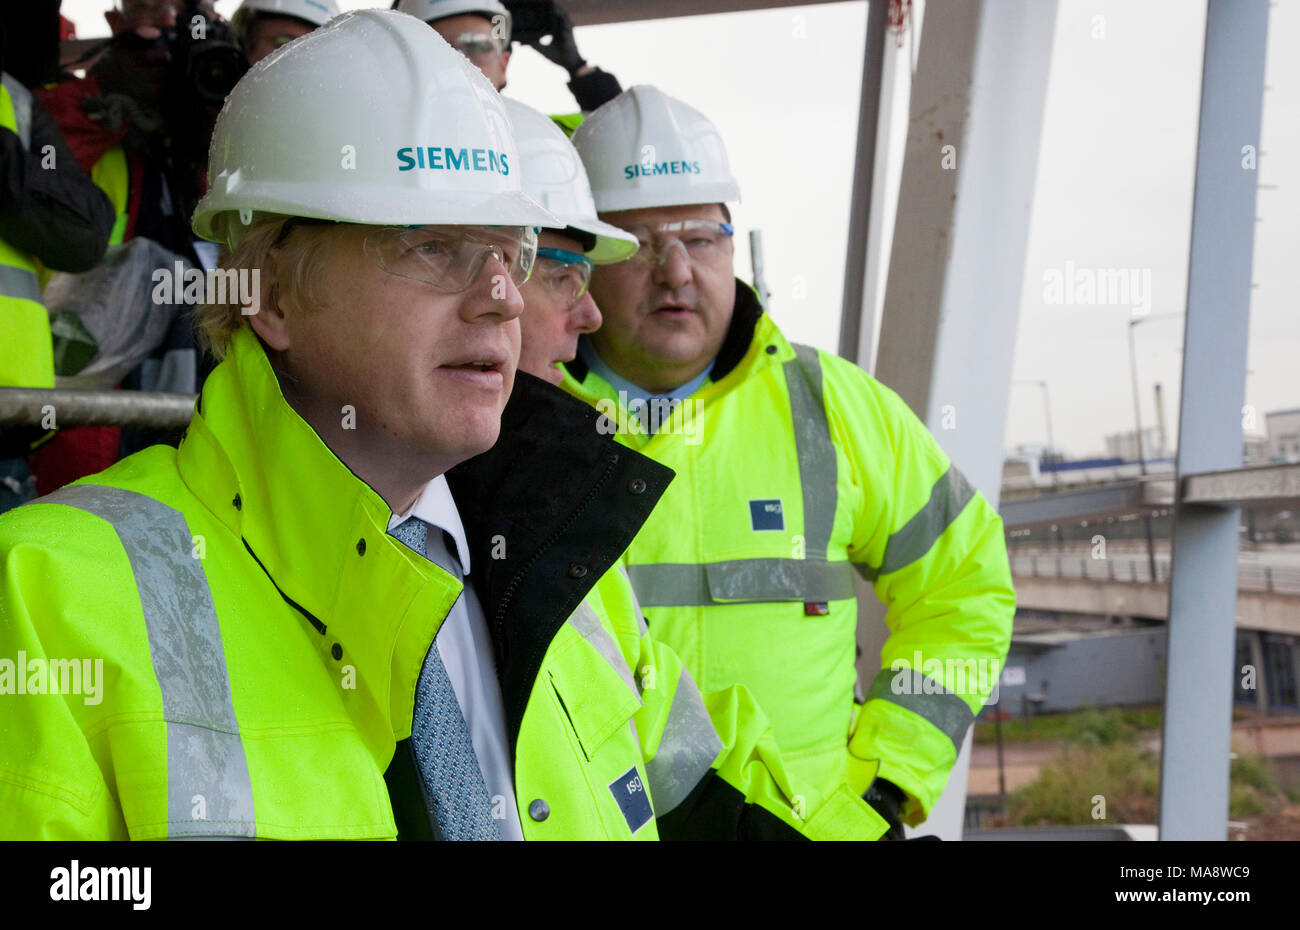 26/10/2011. London, UK. L-R, Boris Johnson and Andras J Goss, CEO Siemens plc and North West Europe). London Mayor Boris Johnson today, 26 October, attended the 'Topping-Out' of innovative Siemens sustainability centre in the heart of Royal Docks Enterprise Zone, where he met with Andreas J. Goss (Chief Executive, Siemens plc and North West Europe), Roland Busch (CEO, Infrastructure & Cities Sector, Siemens AG) and Sir Robin Wales, the Mayor of Newham.  The exo-features of the Siemens flagship sustainability centre include photovoltaic panels and a rain-wate Stock Photo